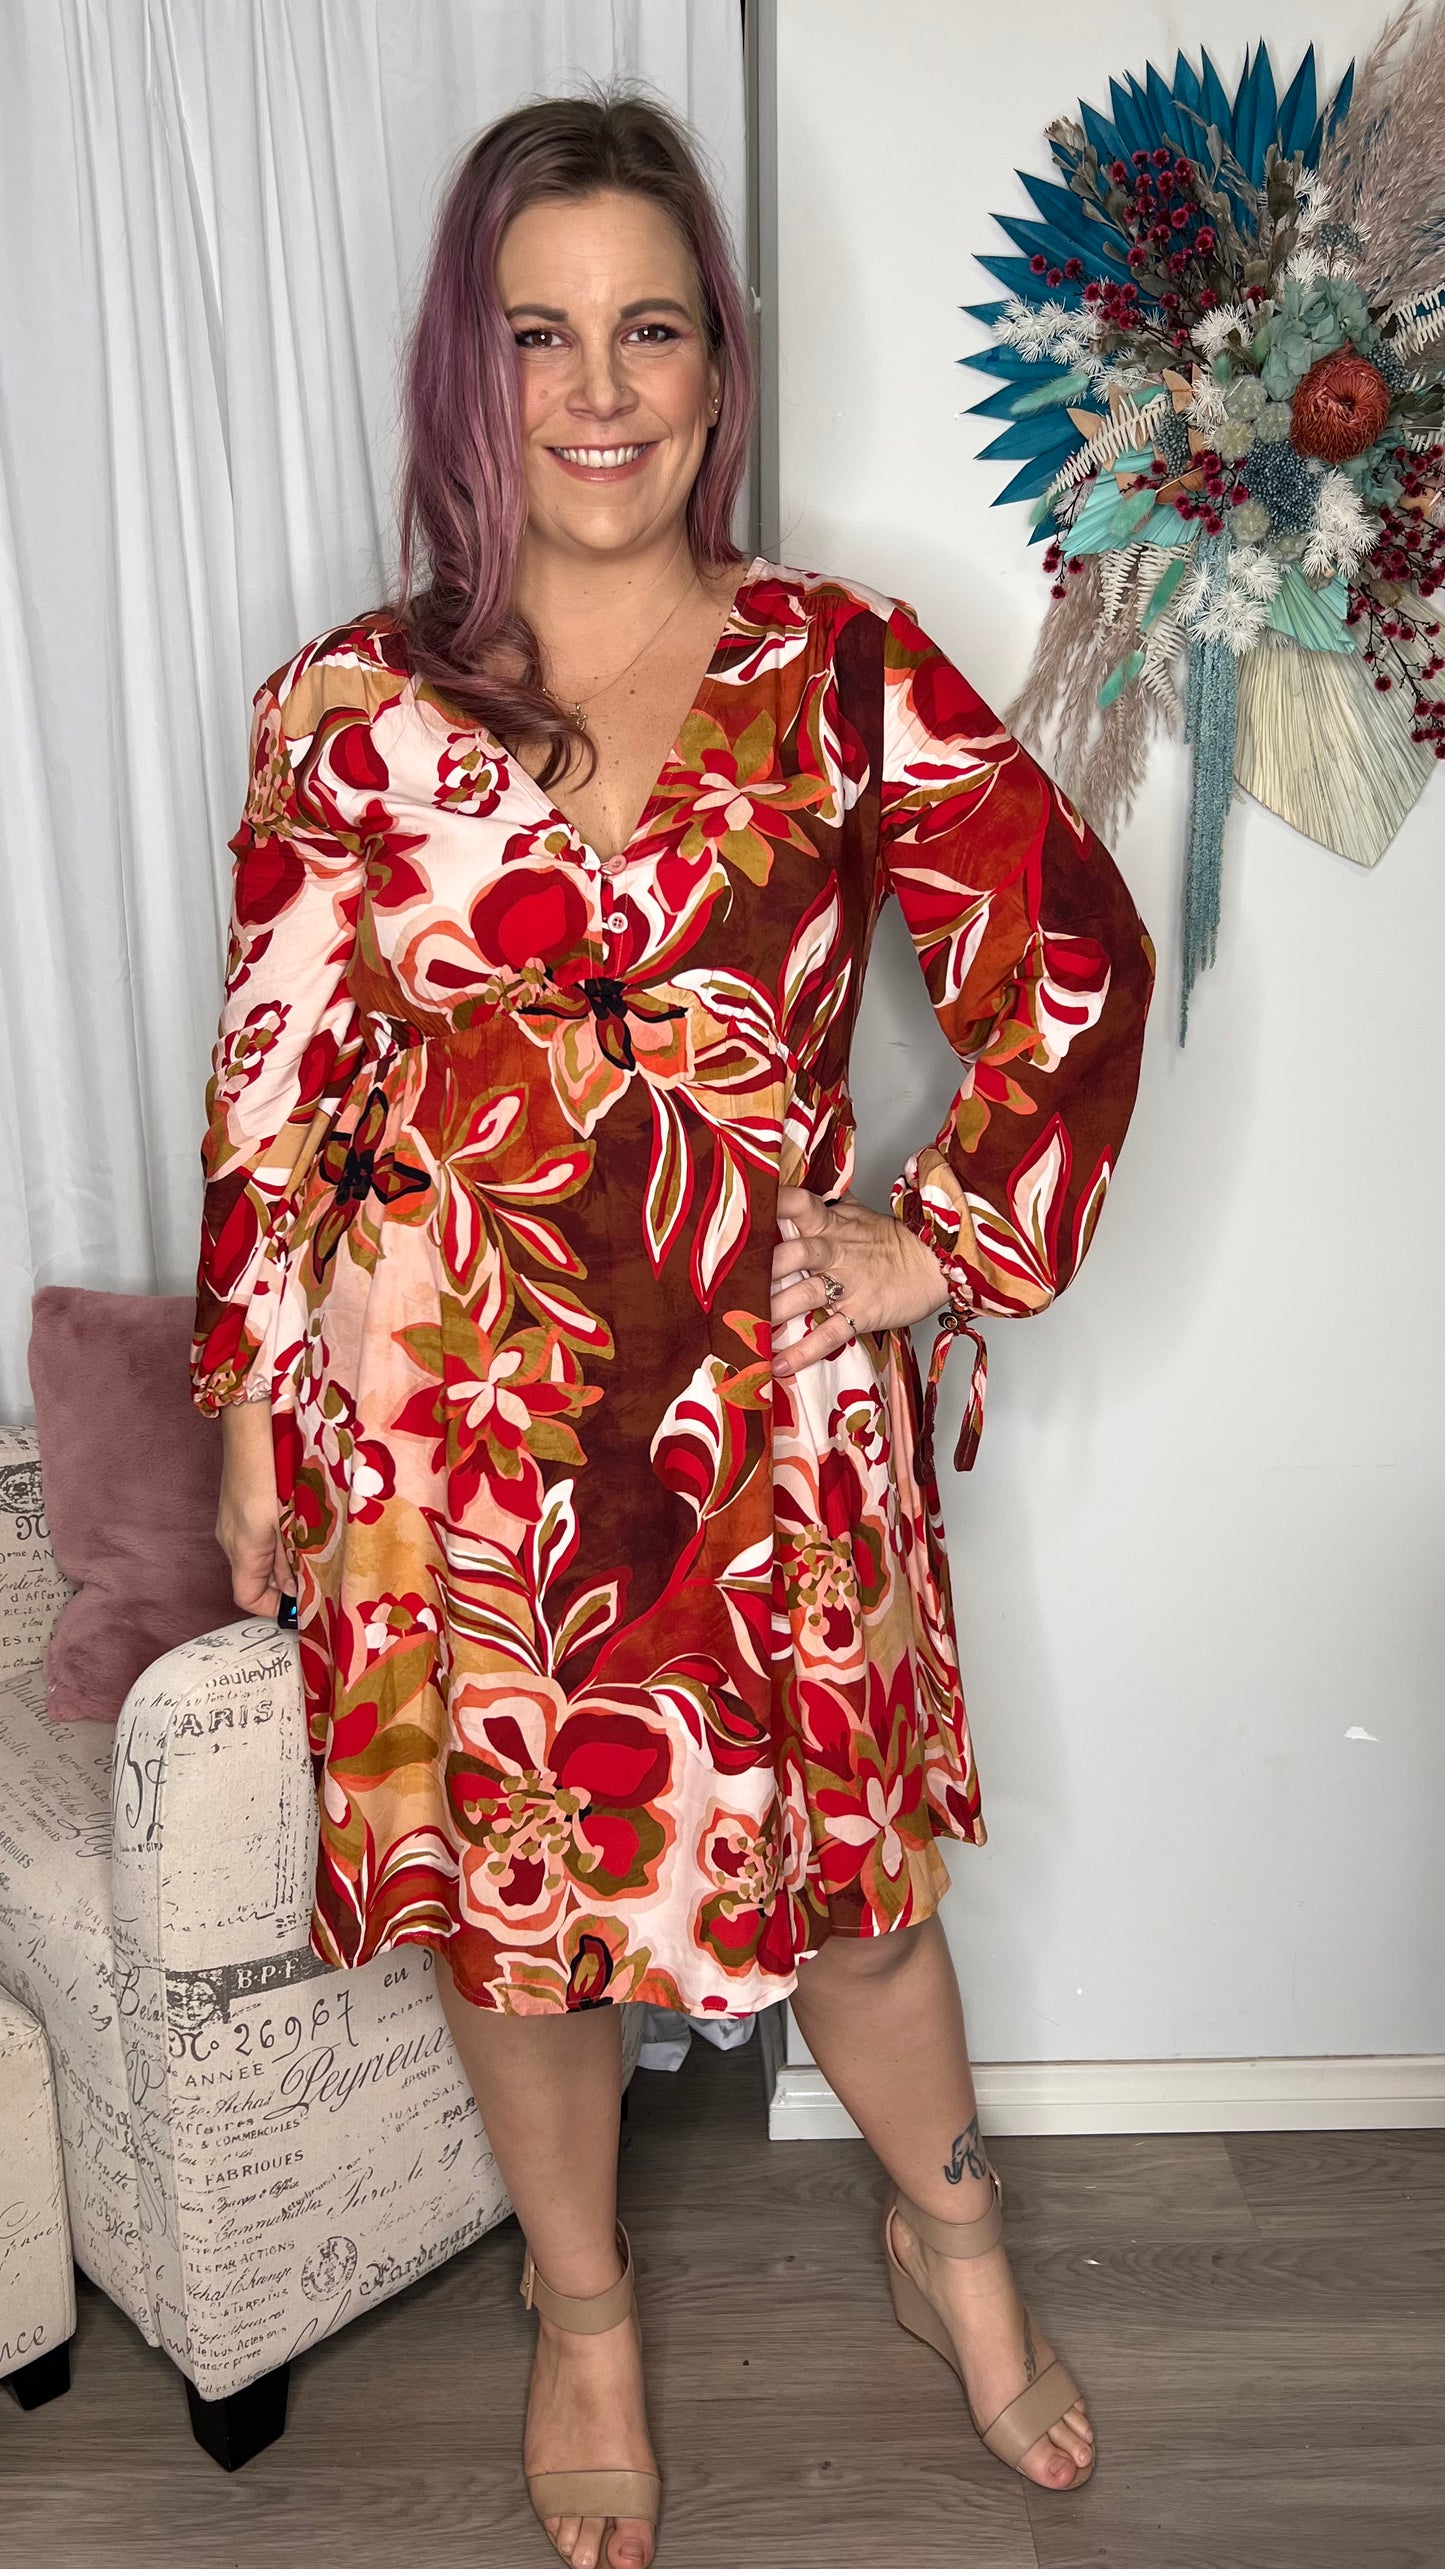 Yasmin Secret Garden Dress: The Yasmin Secret Garden Dress is the perfect addition to your winter wardrobe. Featuring a beautiful floral print, cute detailing at the bust and wrists in a drop w - Ciao Bella Dresses 